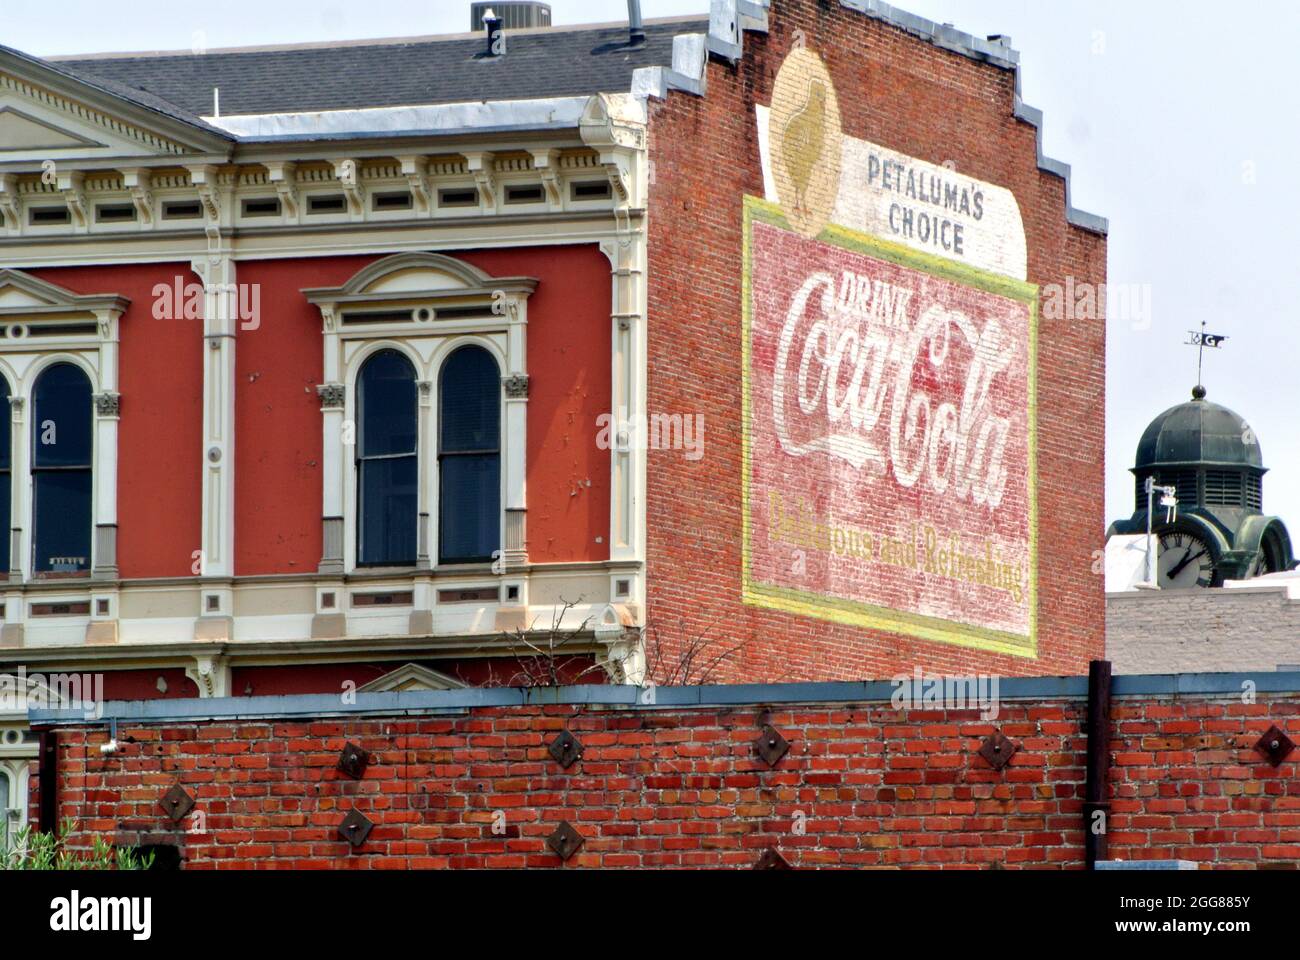 downtown view of historic small town Petaluma Califonia  USA buildings with classic coca cola advertisement sign Stock Photo